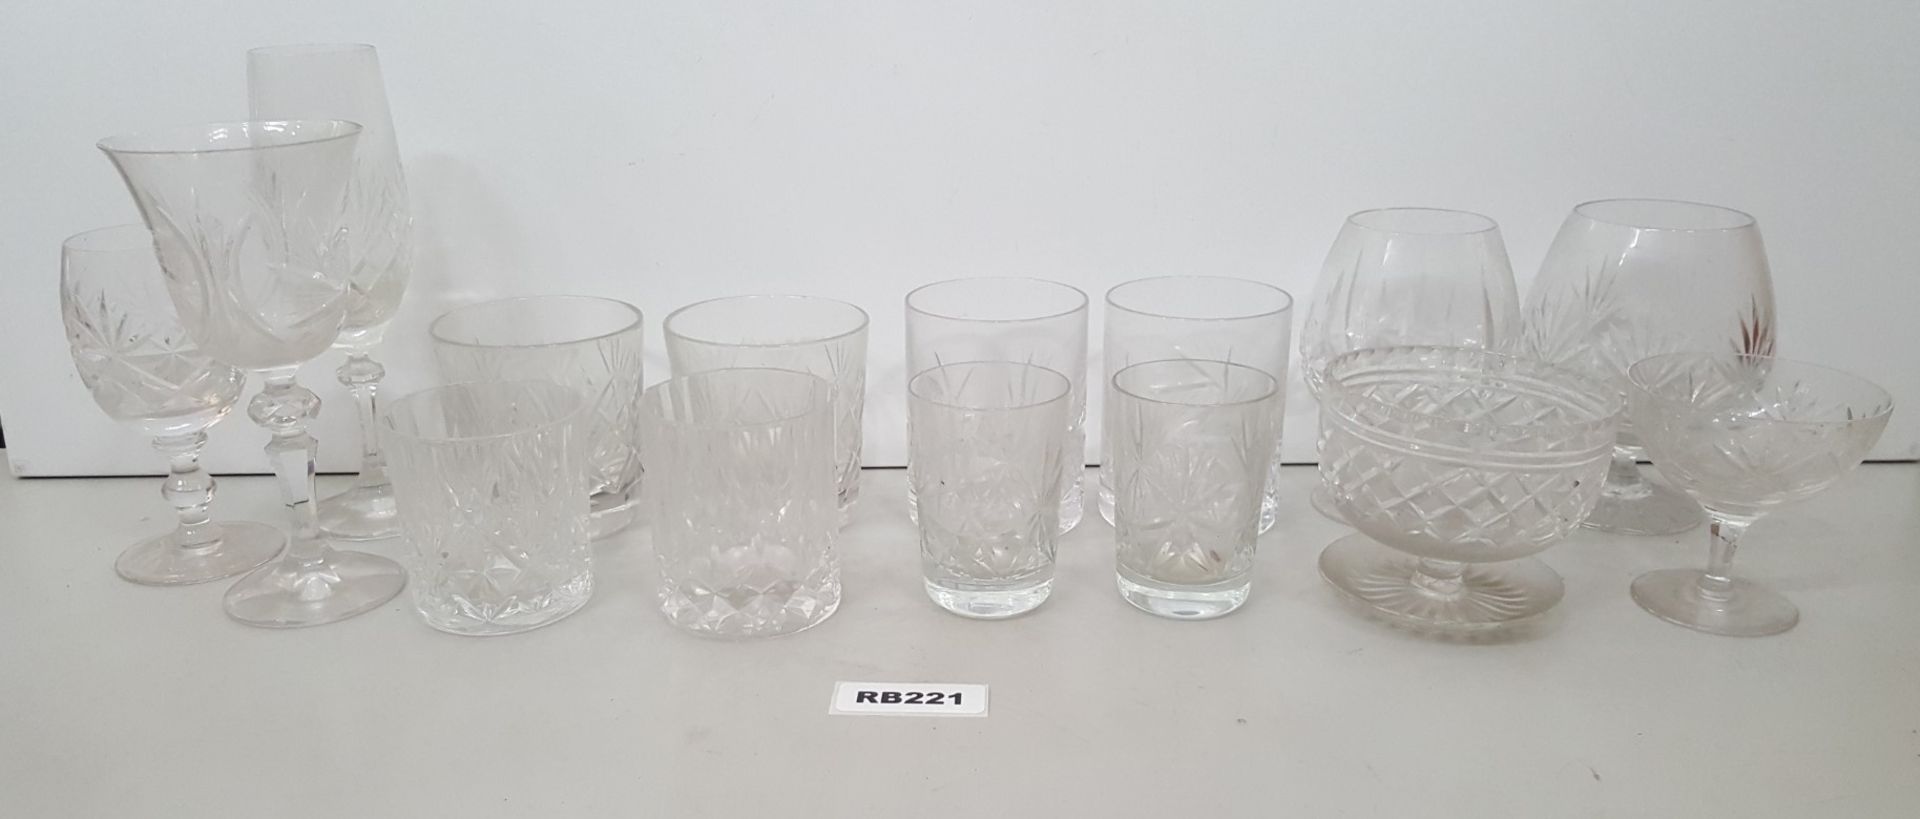 15 x Vintage Cut Glass Drinking Glasses - Ref RB221 I - Image 4 of 5